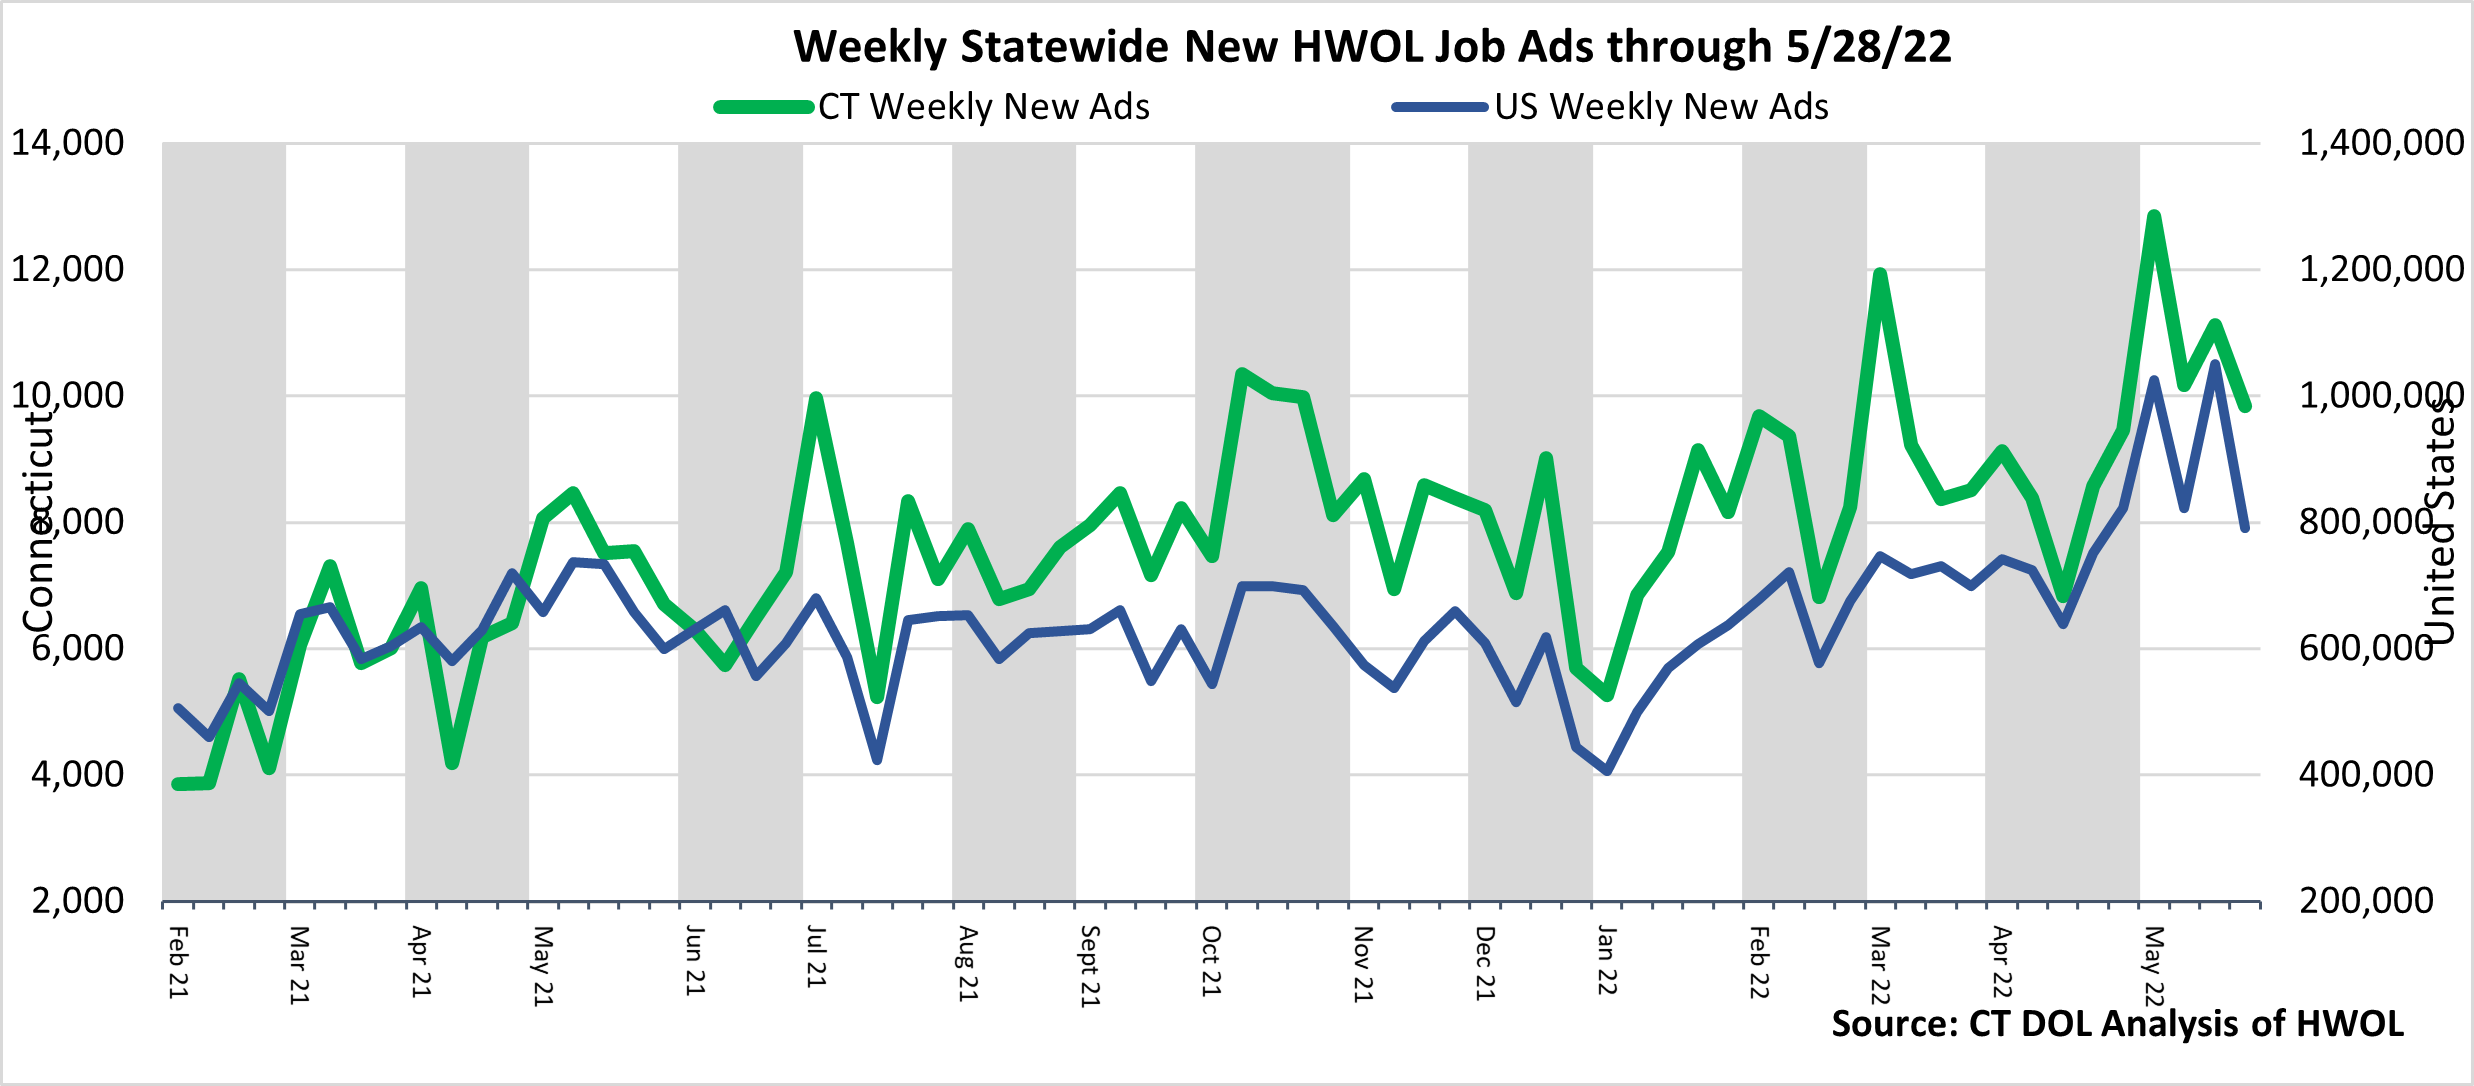 Connecticut Weekly Statewide New HWOL Job Ads through 05/28/22